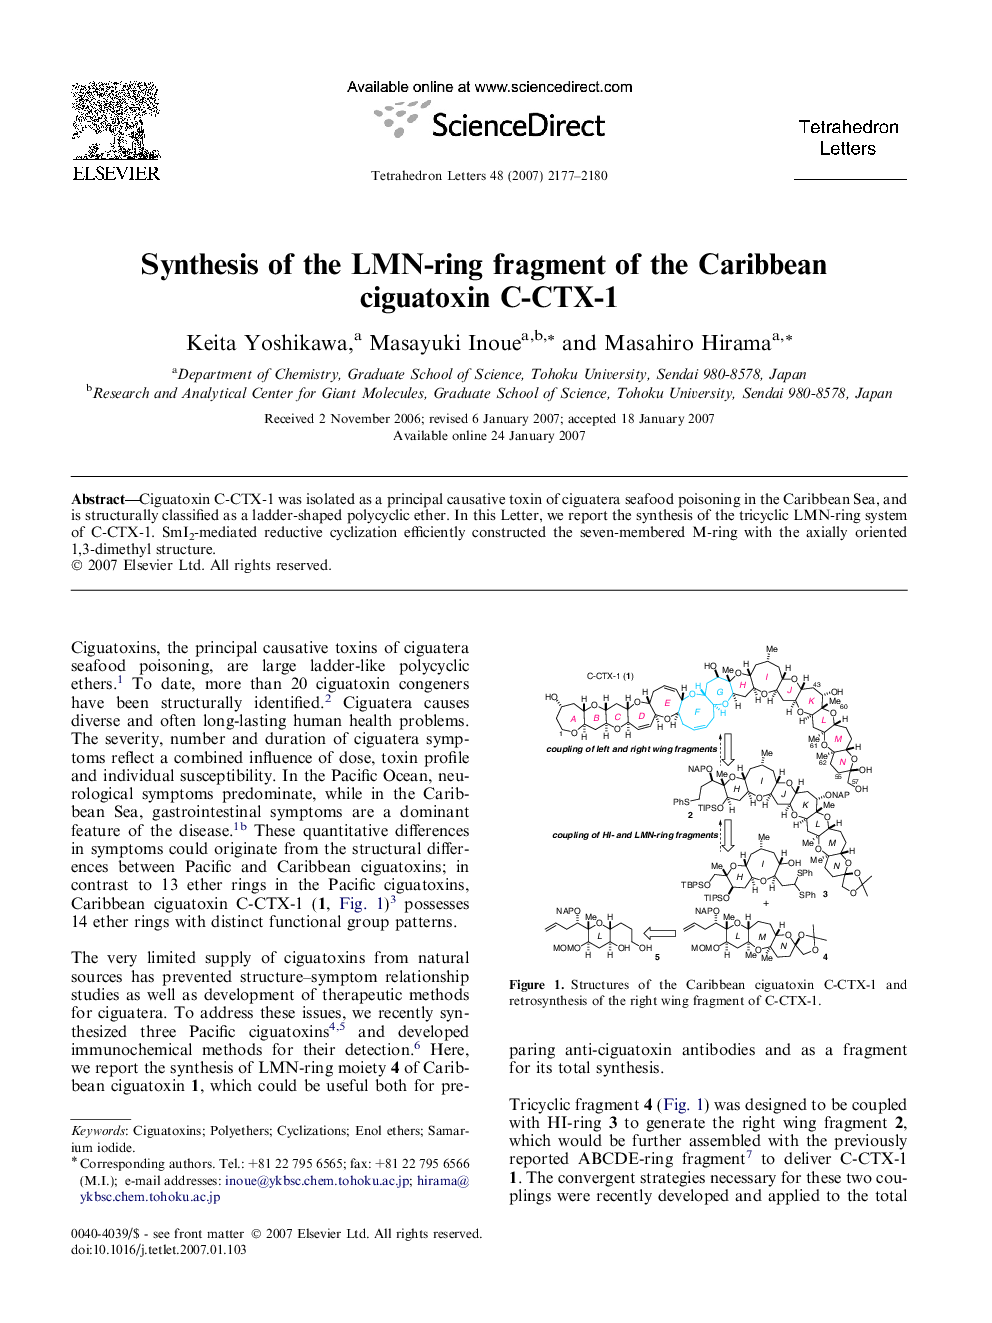 Synthesis of the LMN-ring fragment of the Caribbean ciguatoxin C-CTX-1